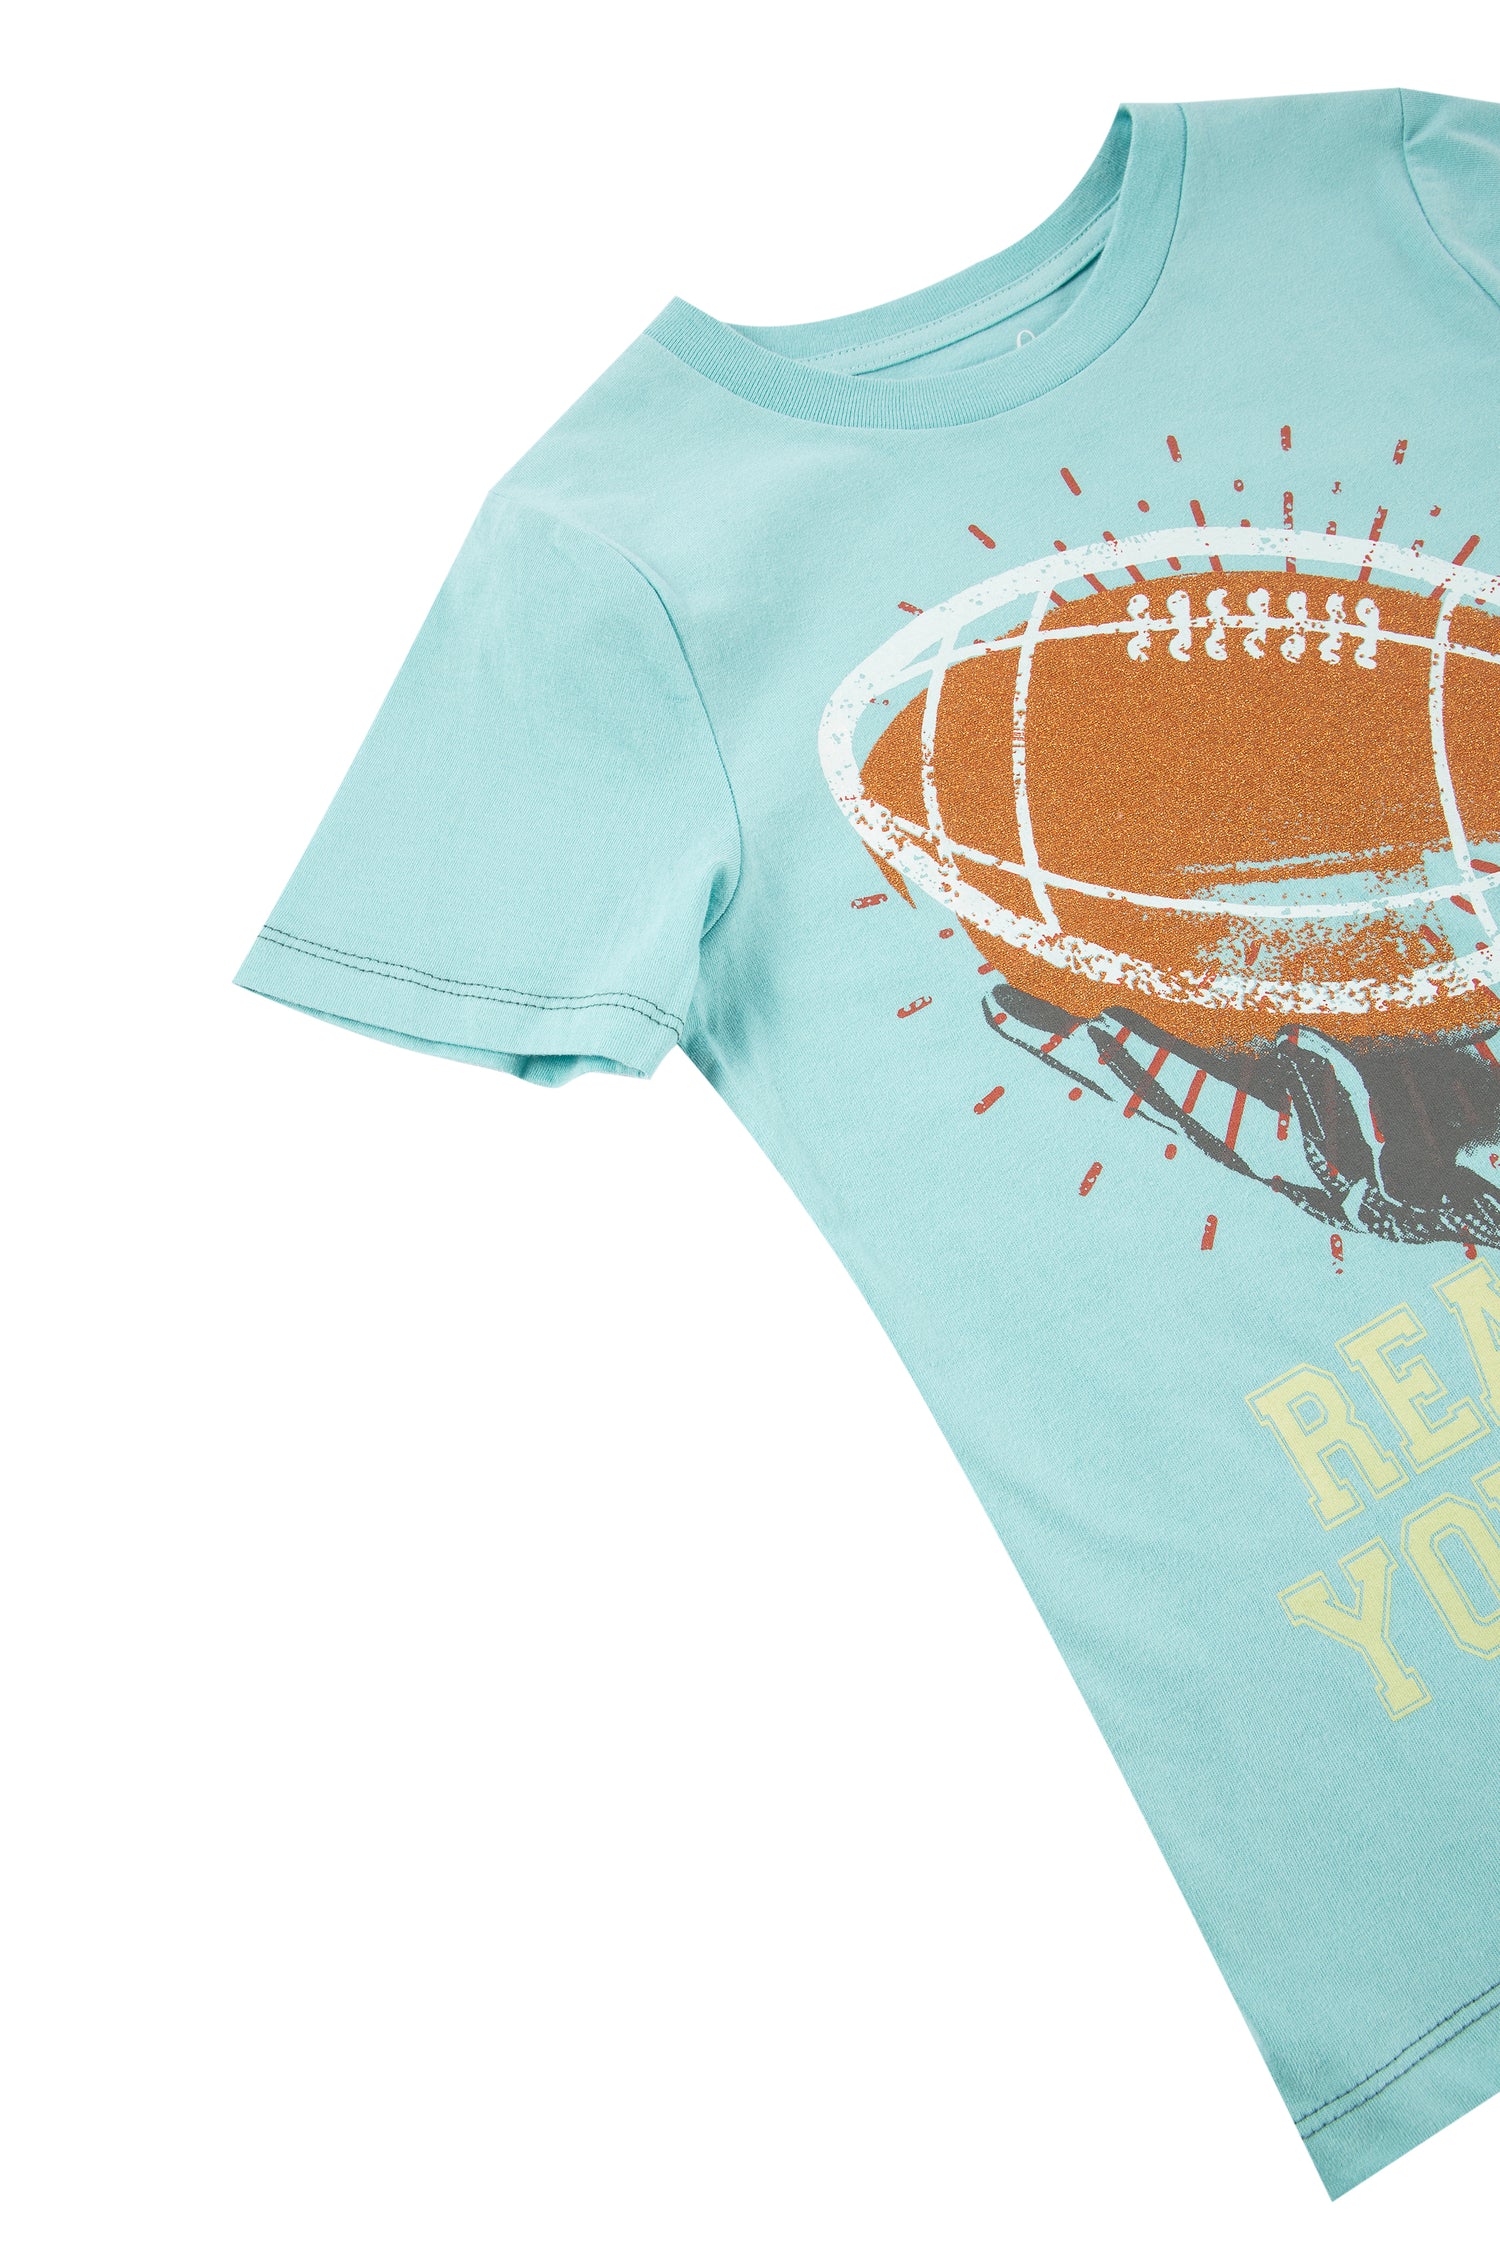 Close up view of blue tee with a football and "reach for your goals" written